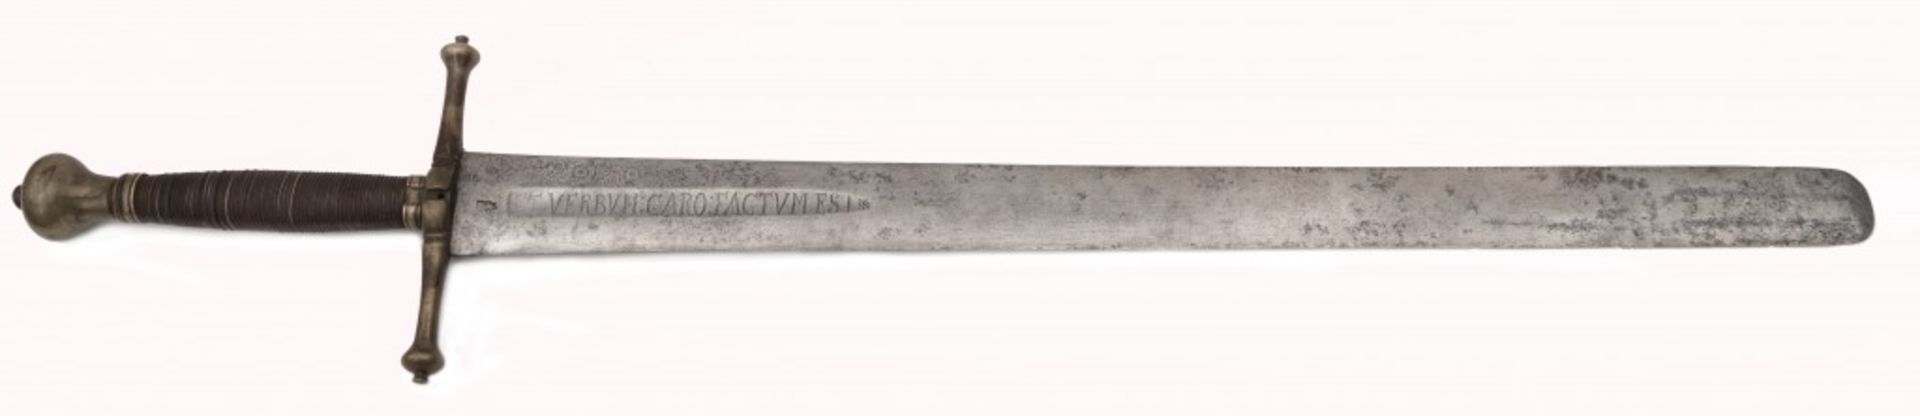 A German Executioner´s Sword - Image 3 of 8